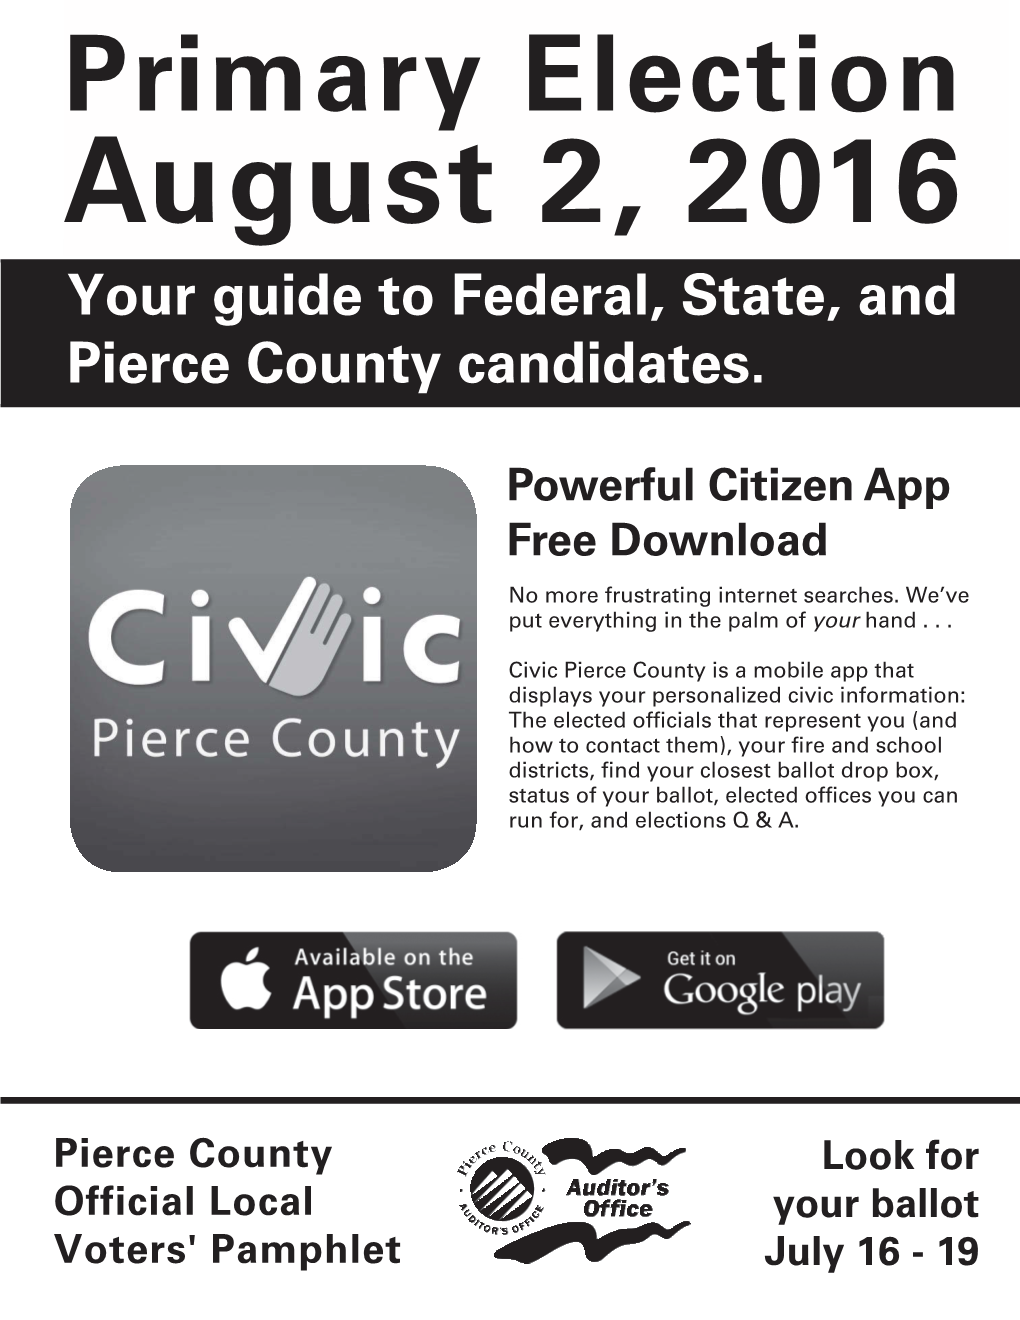 Primary Election August 2, 2016 Your Guide to Federal, State, and Pierce County Candidates